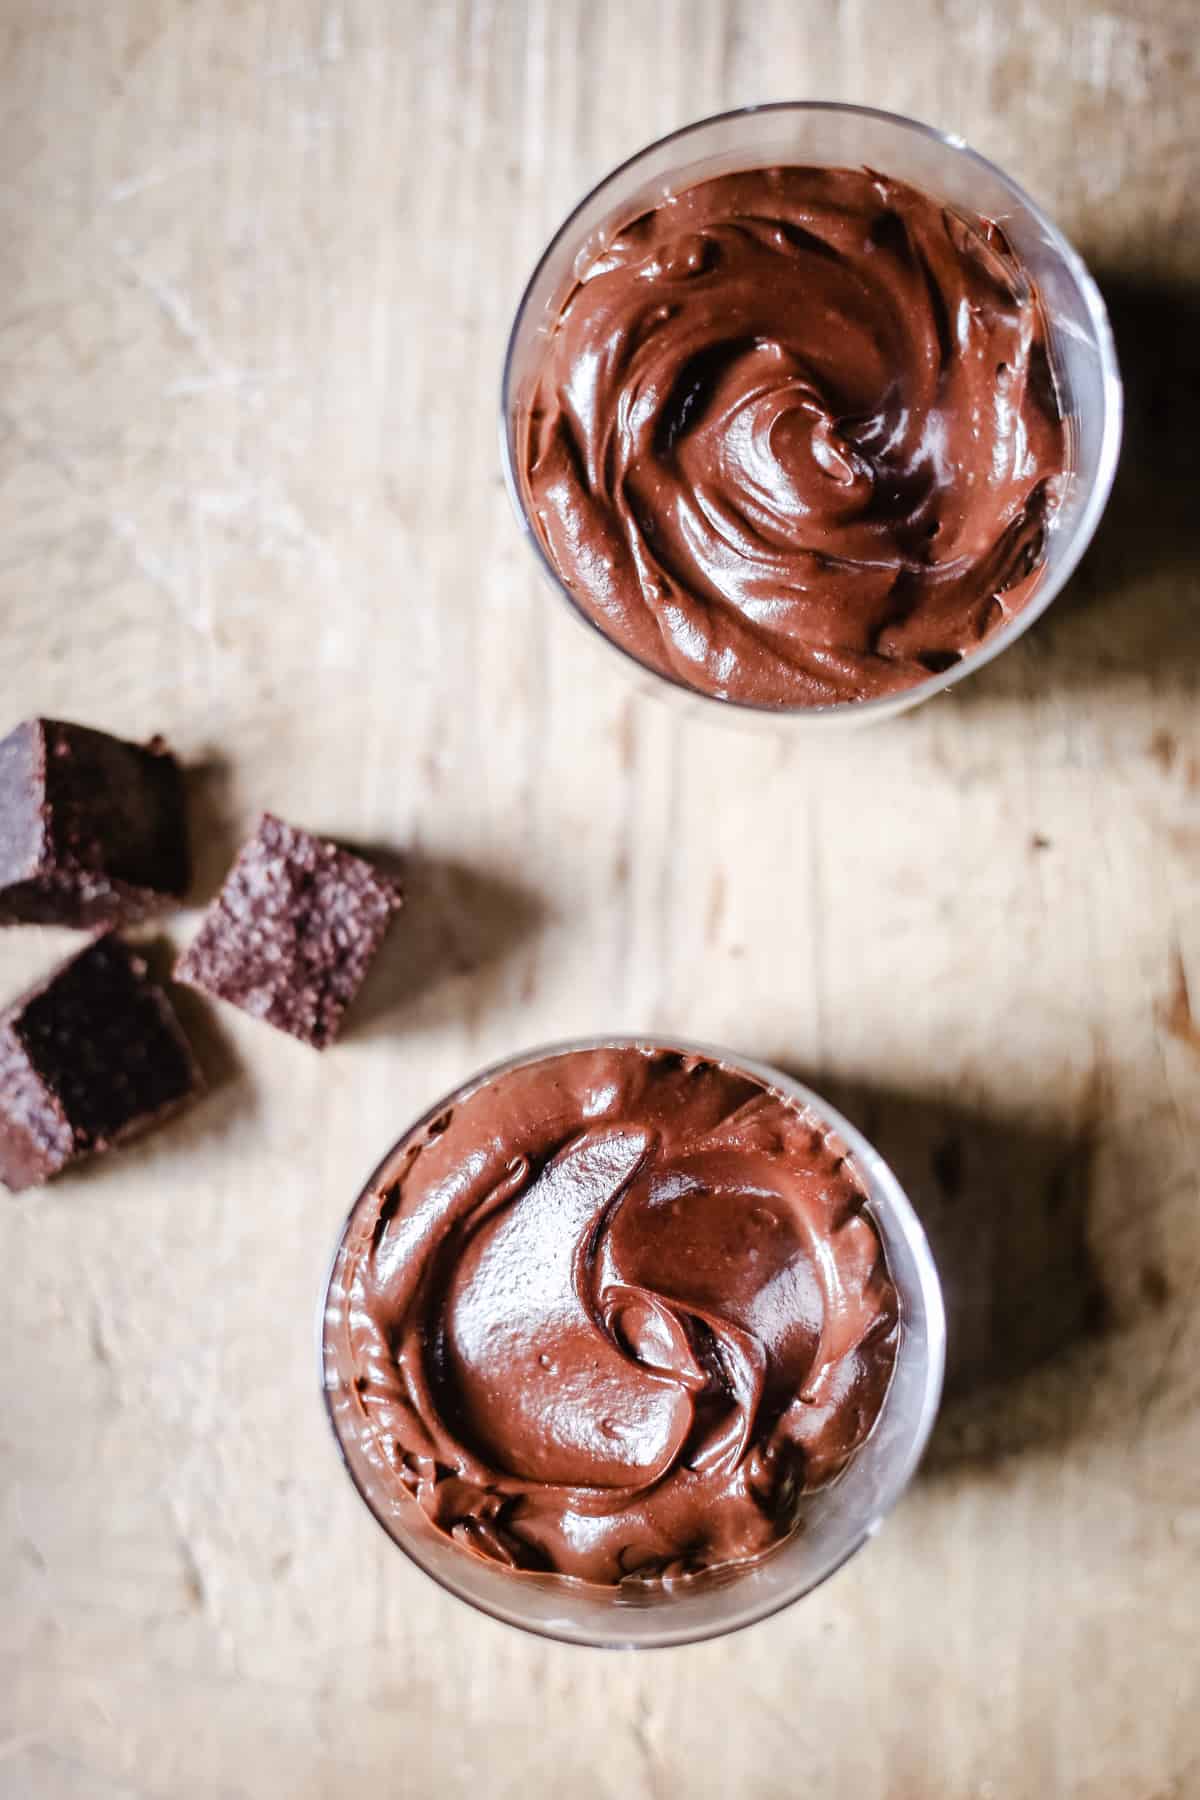 Chocolate Mousse in glasses on a wooden board surrounded by brownies pieces